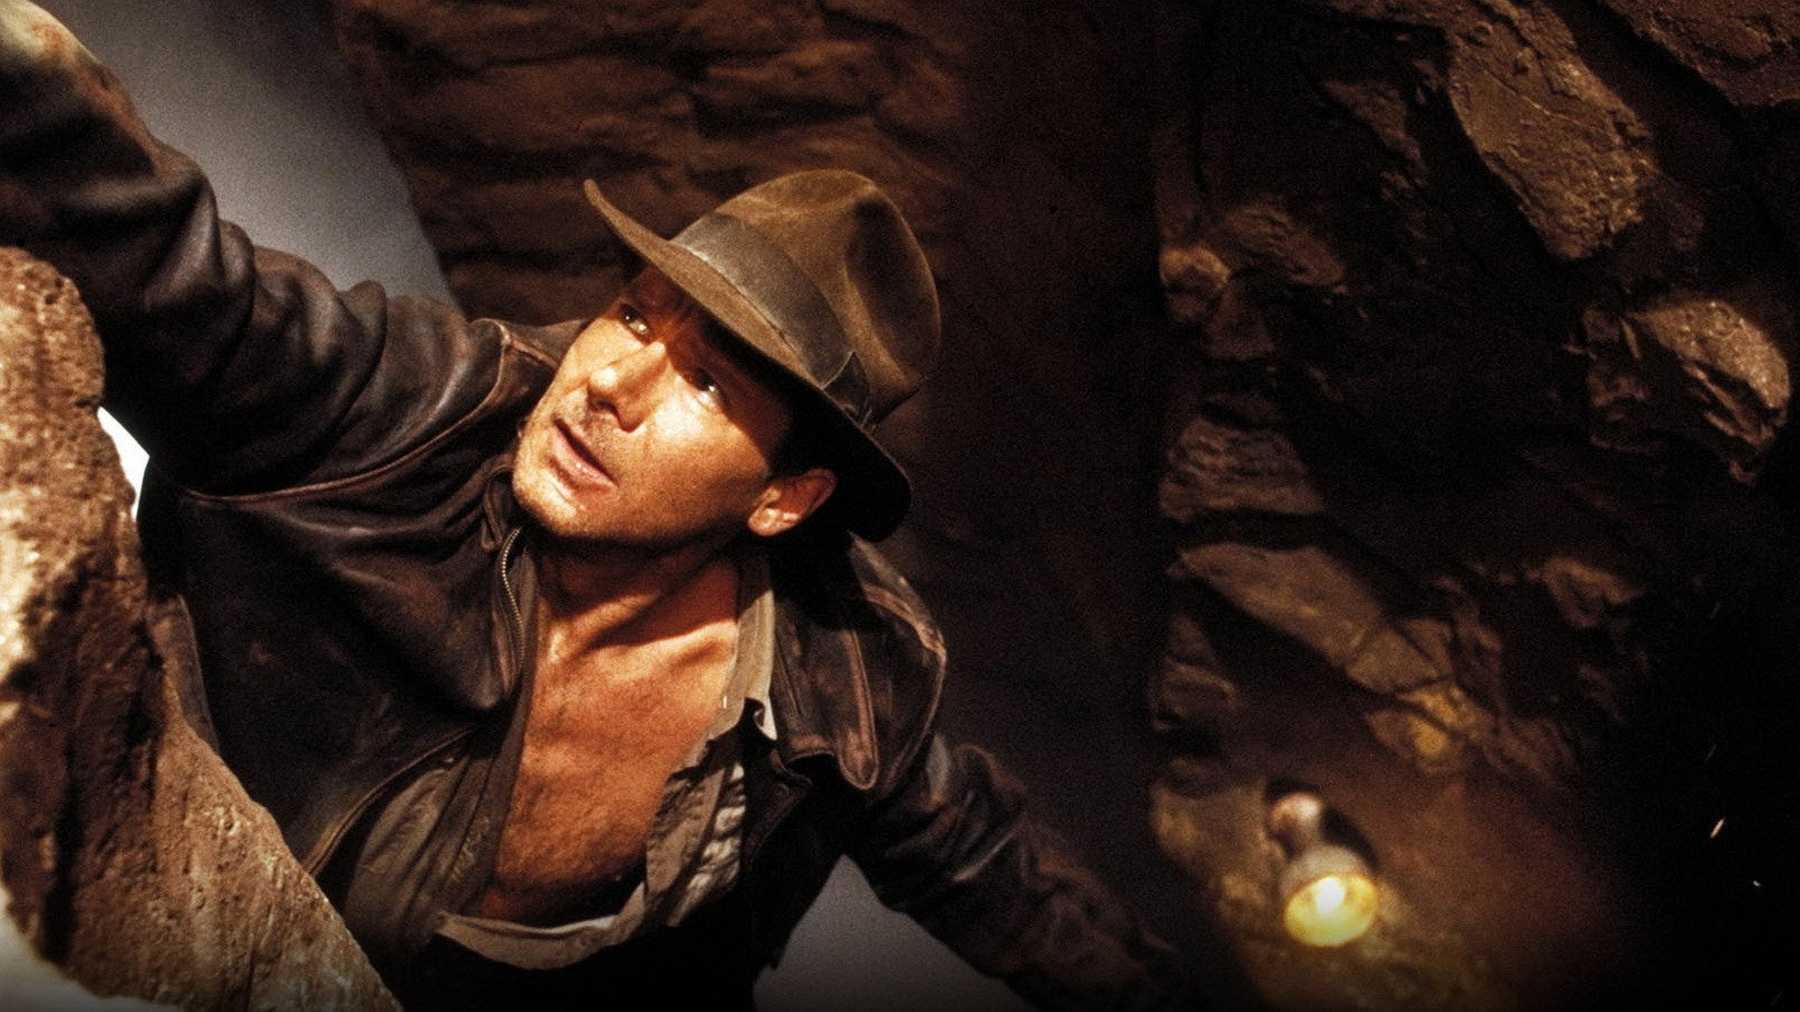 Indiana Jones explores a mysterious cave filled with ancient treasures.